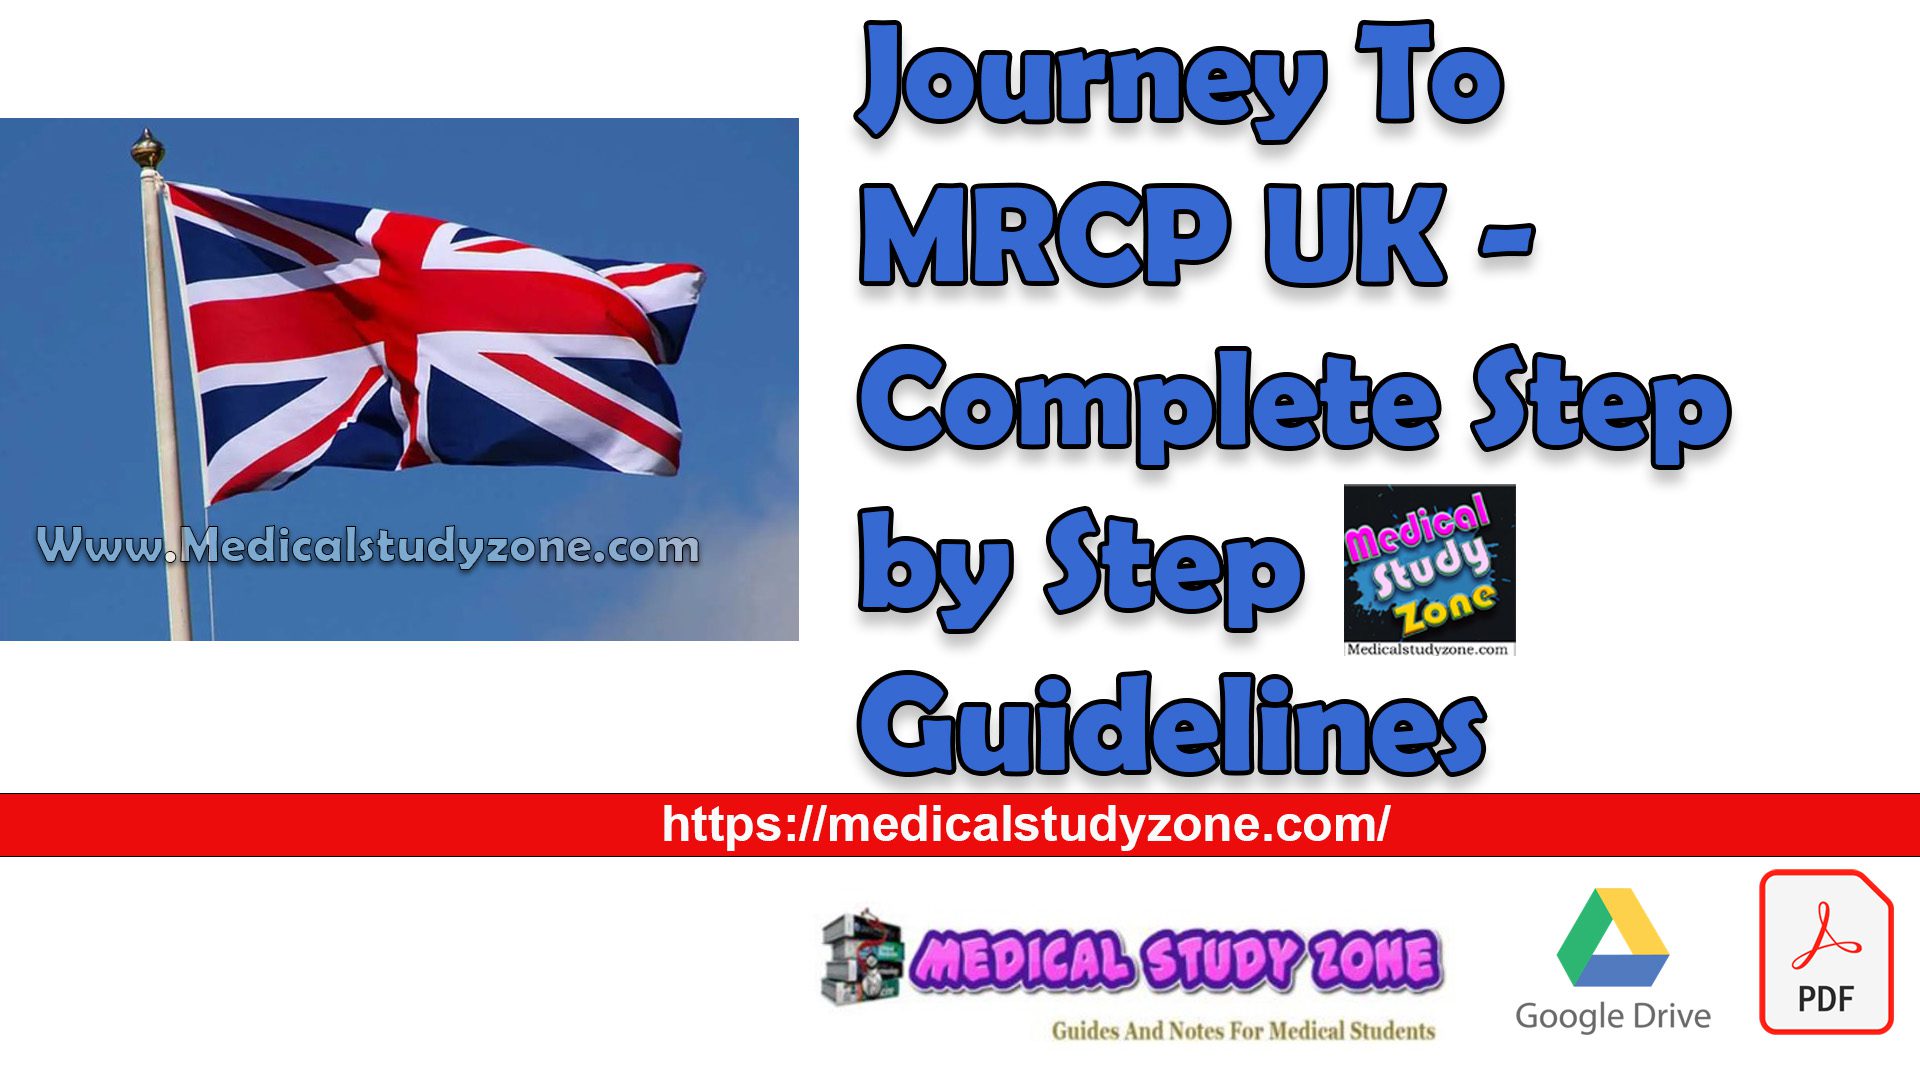 Journey To MRCP UK 2023 - Complete Step by Step Guidelines